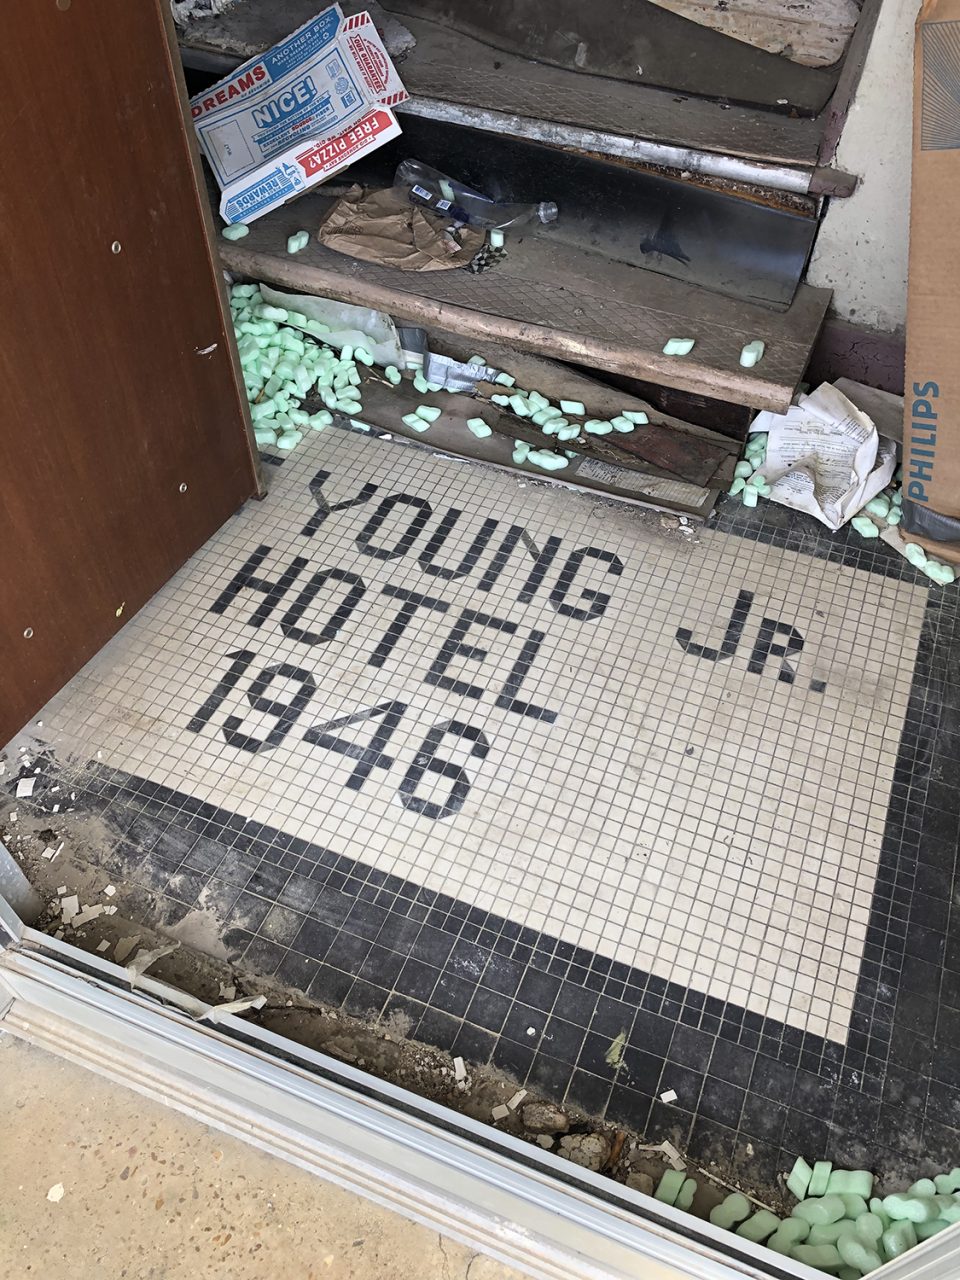 Tile entry to the old E.F. Young Jr. Hotel in Meridian, Mississippi